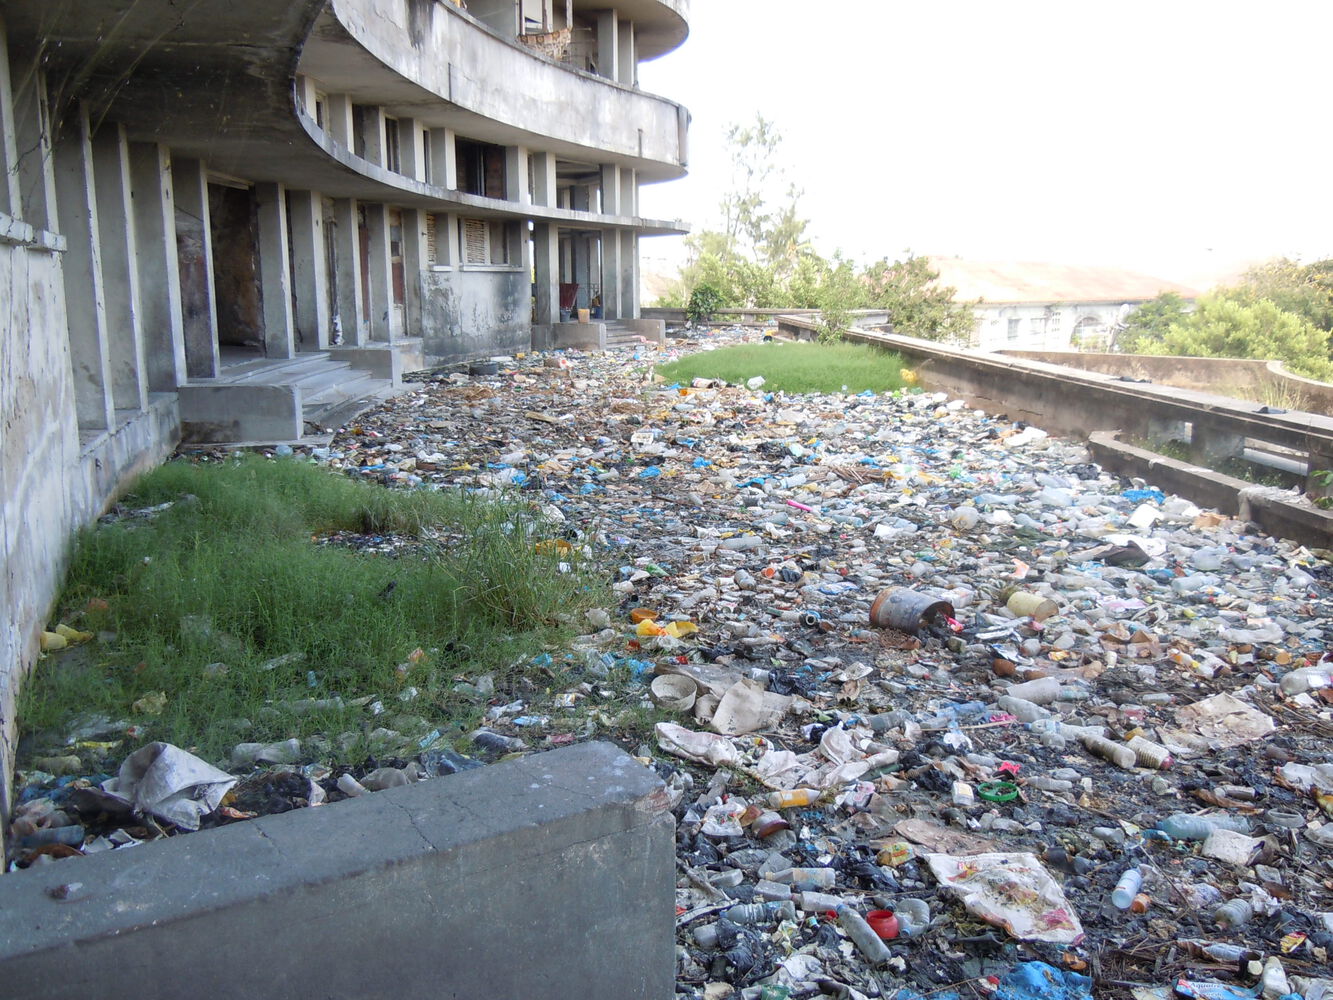 After turning into an apartment with thousands of residents, the current condition of the Grande Hotel is not as luxurious as it used to be, it even looks unkempt until there are piles of garbage